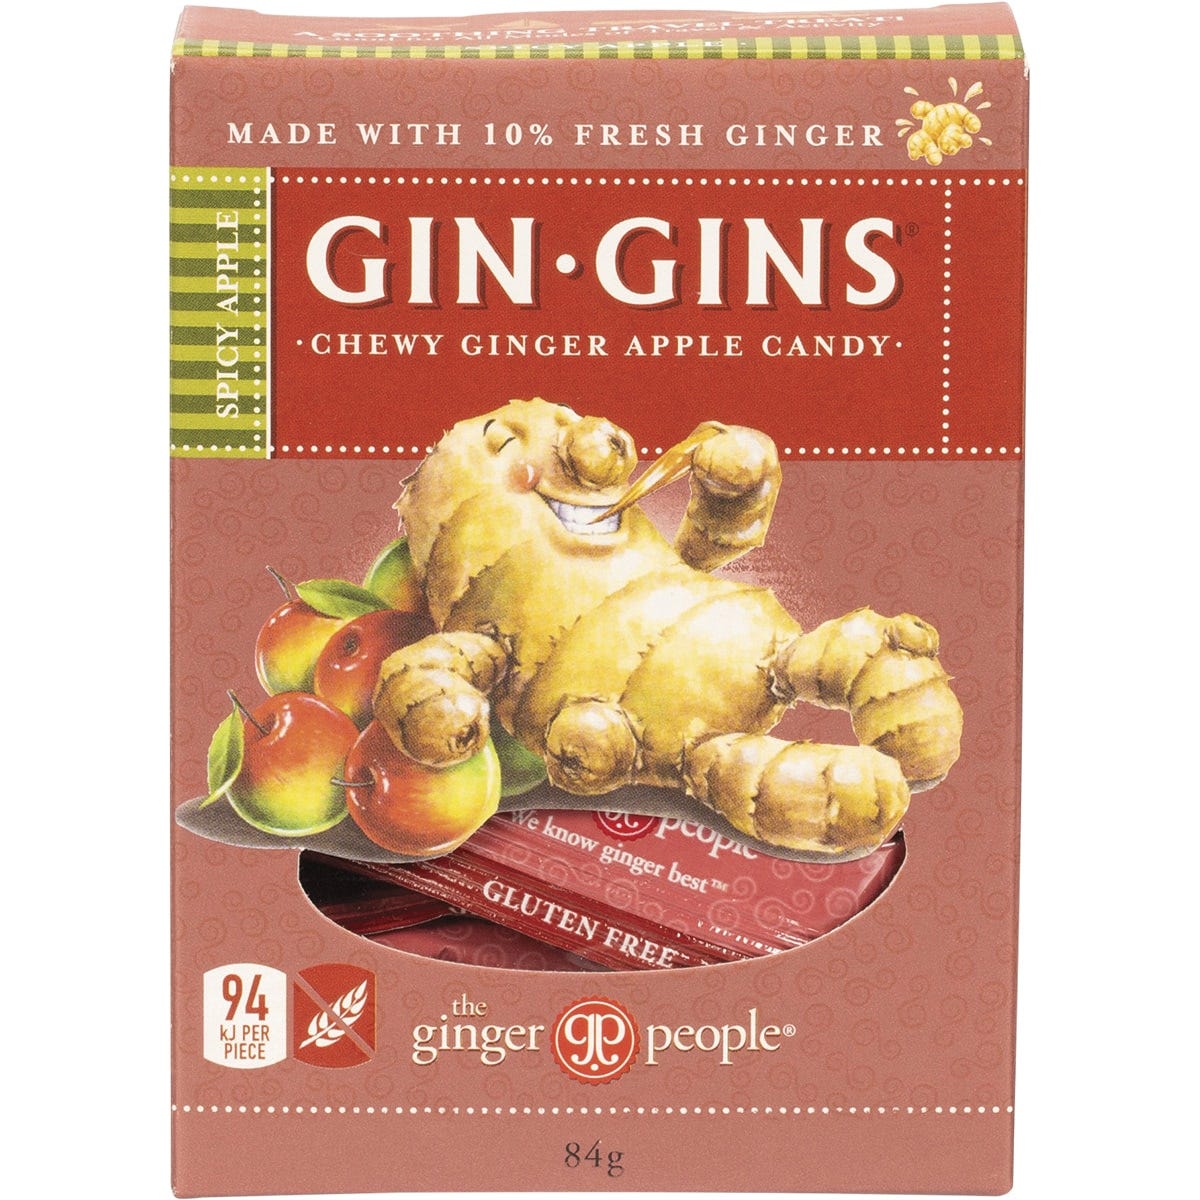 The Ginger People Gin Gins Ginger Candy Chewy Spicy Apple 84g - Dr Earth - Confectionary